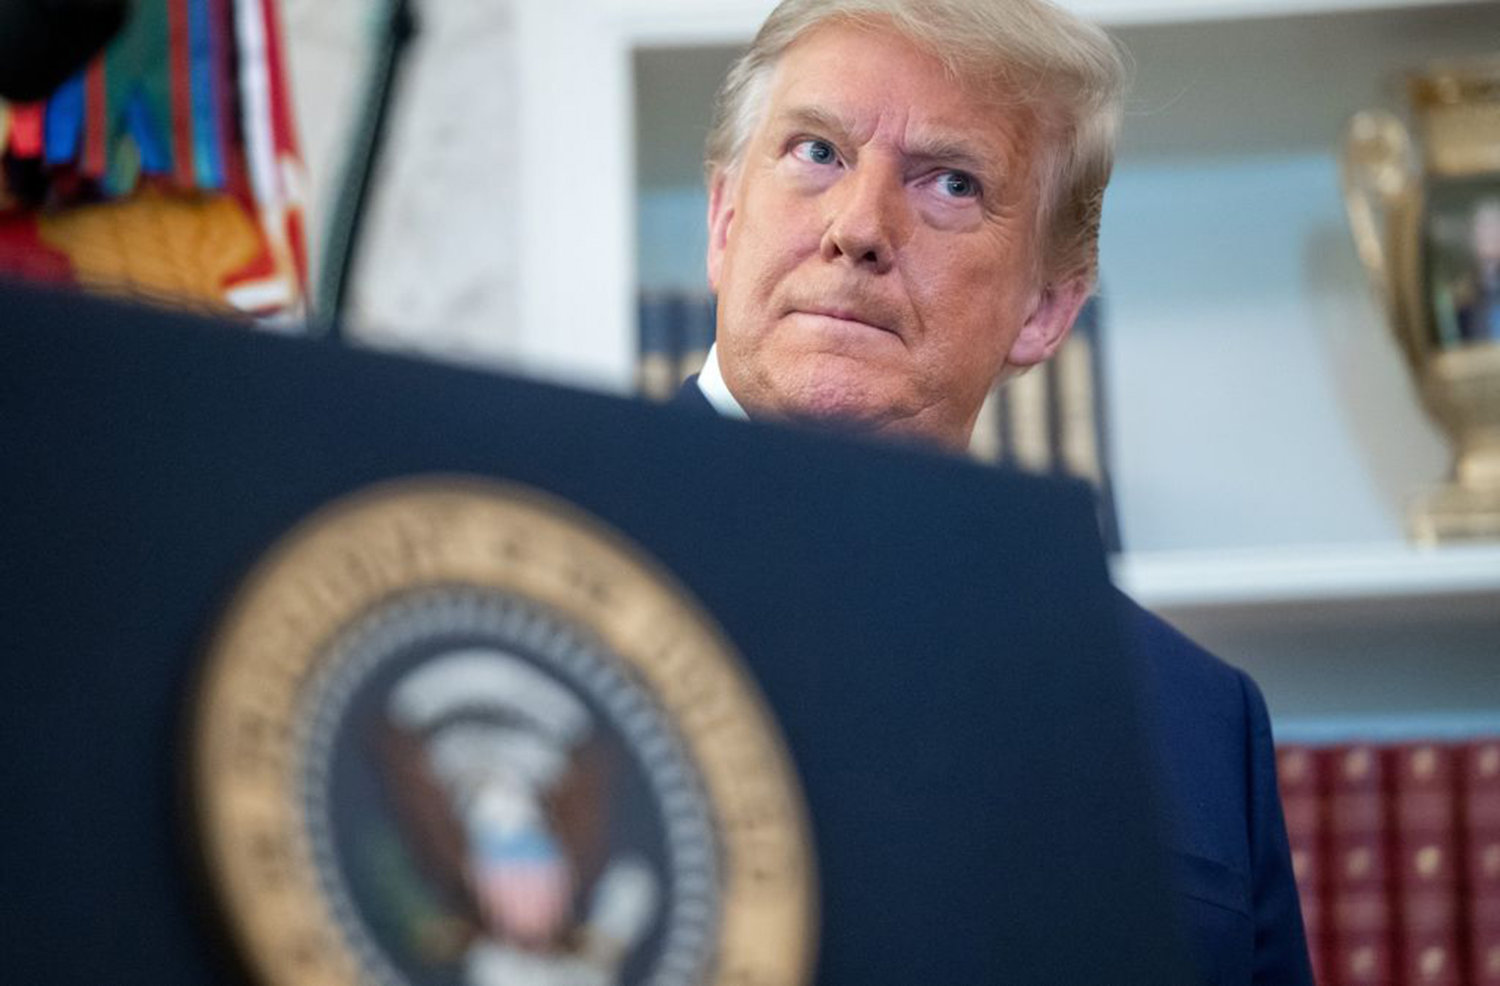 U.S. President Donald Trump in the Oval Office of the White House in Washington, D.C., on Dec. 7, 2020. Trump teased a 2024 bid in an interview Thursday. (Saul Loeb/AFP via Getty Images/TNS)